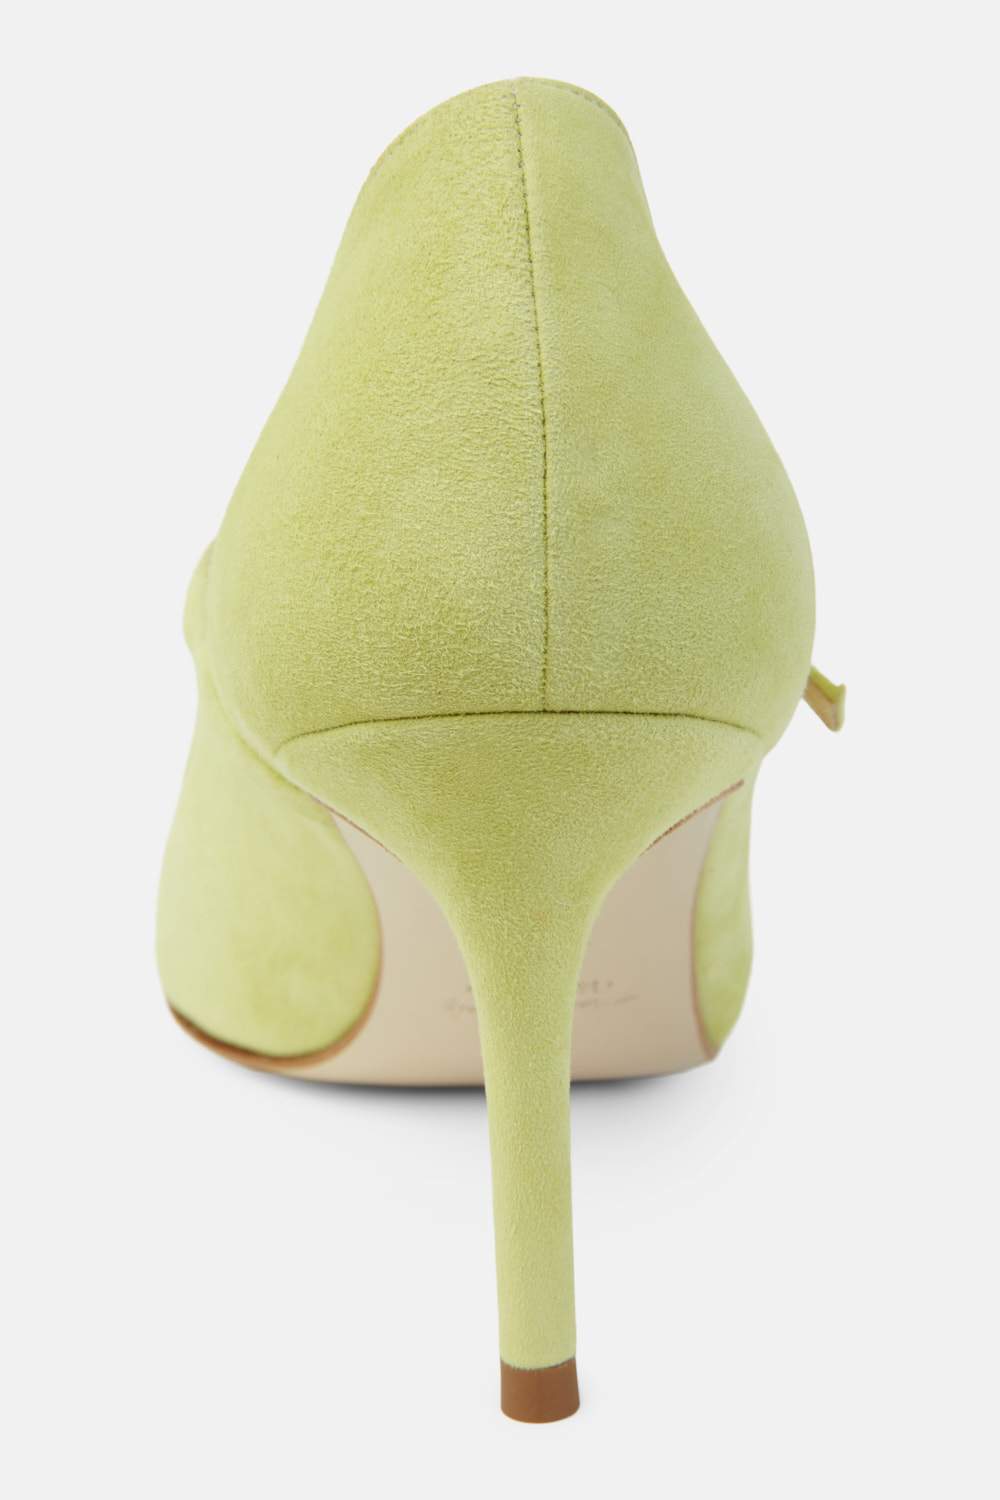 Danilo di Lea by Roselina SHOES Mary Jane Green Suede Pointed Heels